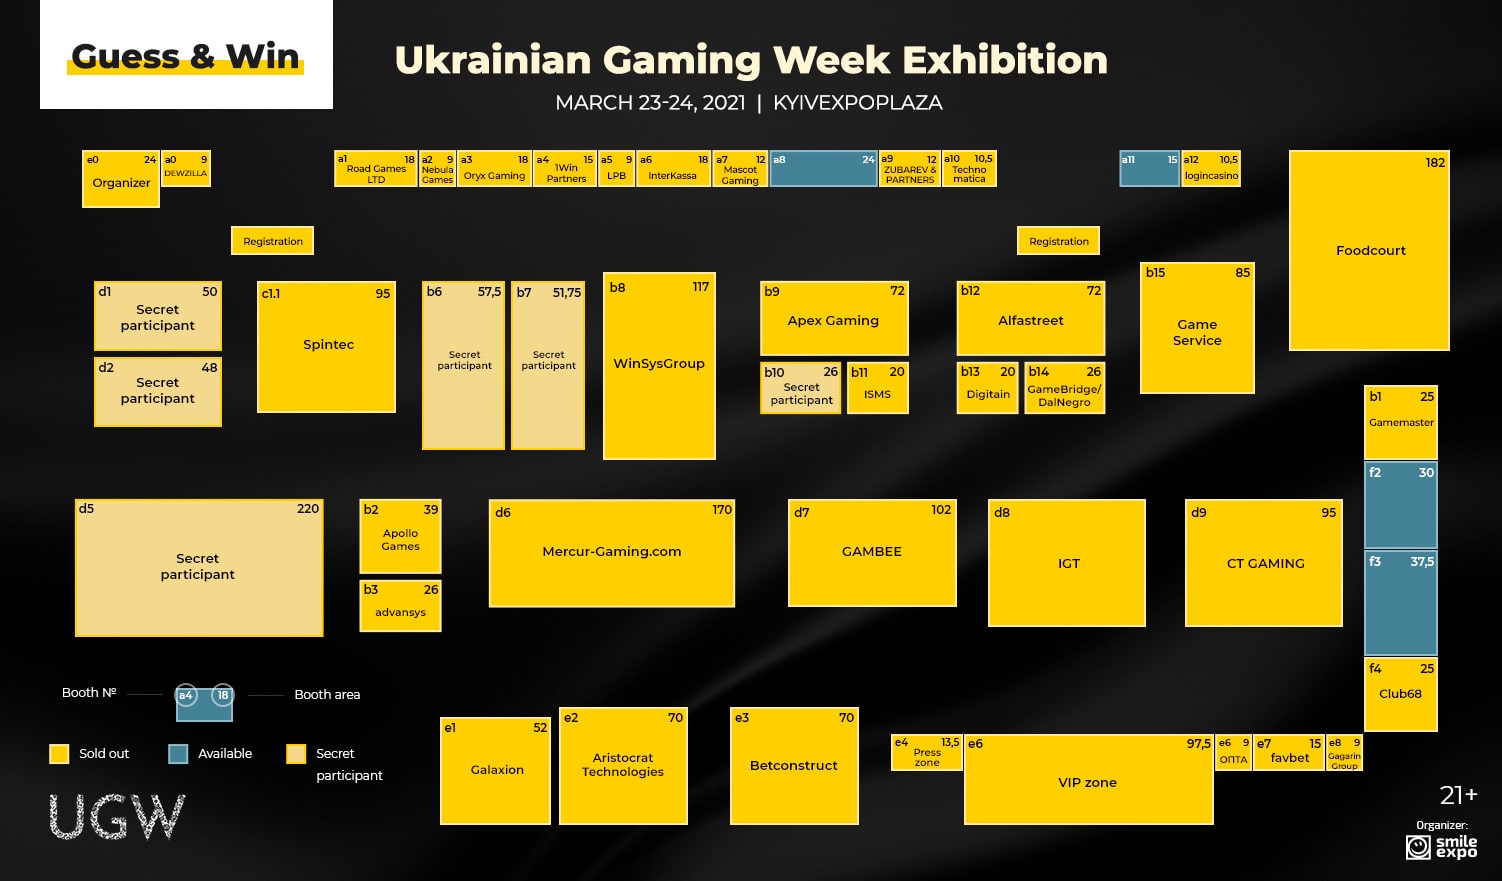 Exhibition plan of the UGW 2021